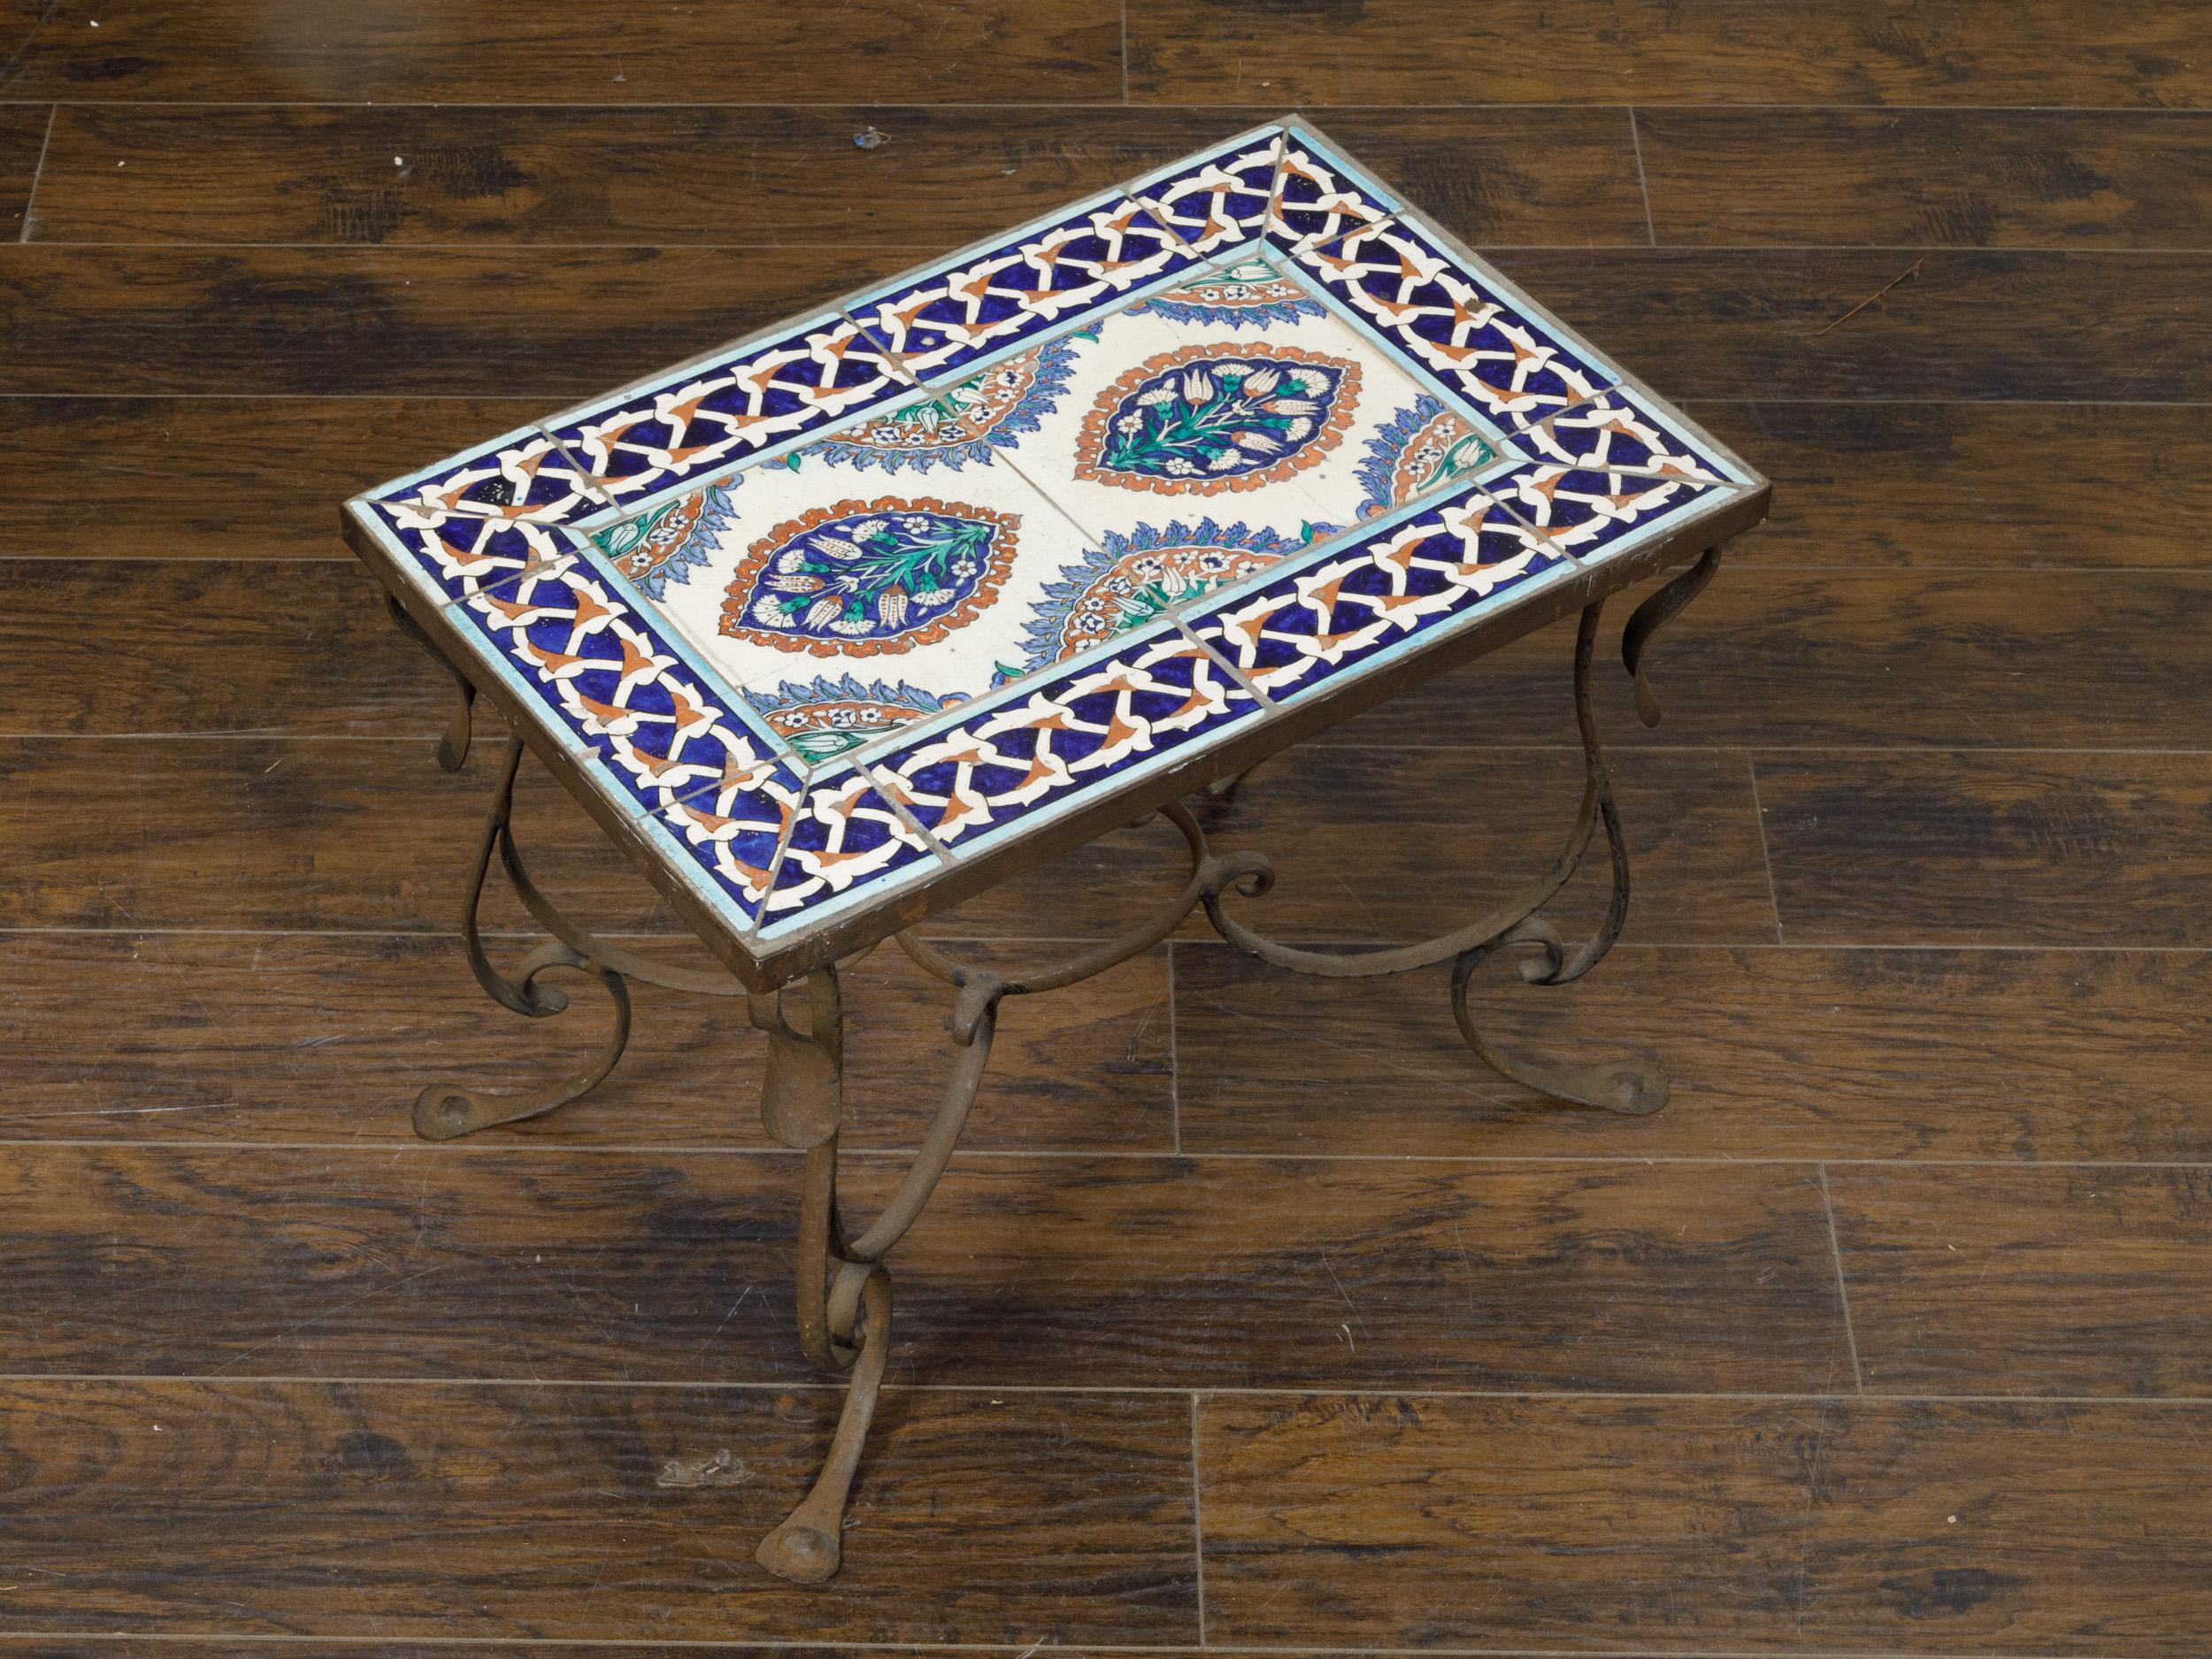 Midcentury Italian Wrought-Iron Coffee Table with Tile Top and Scrolling Base For Sale 1